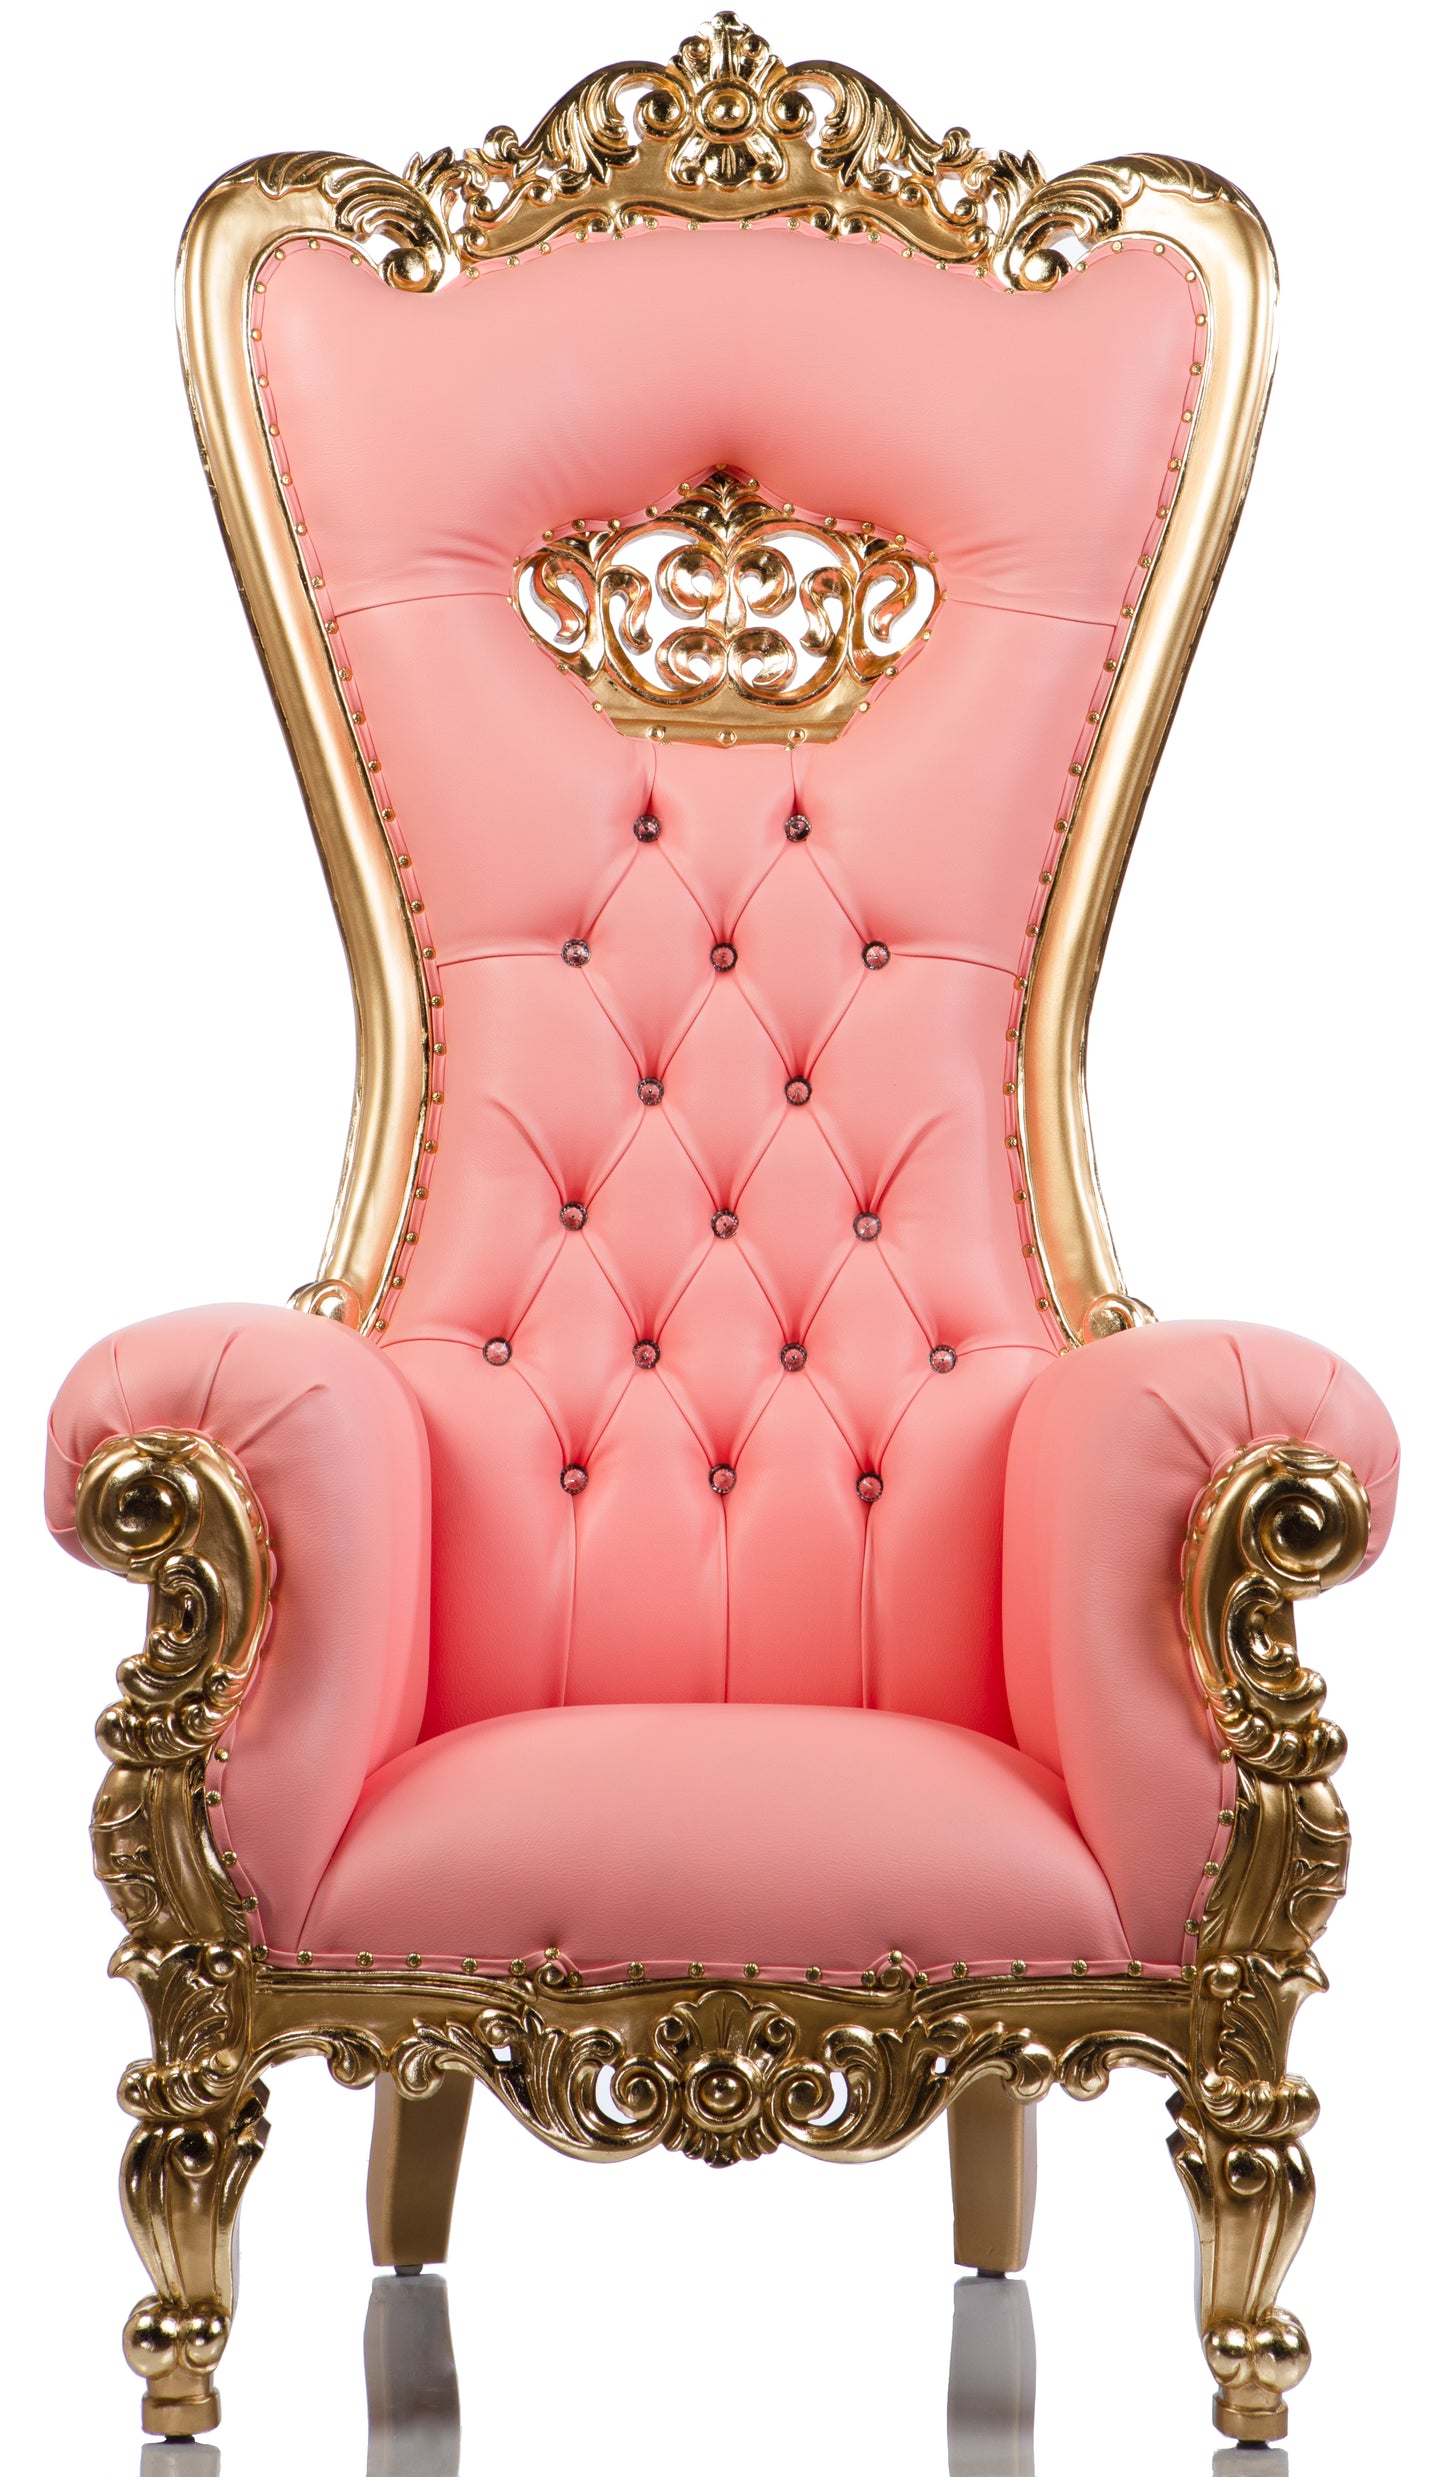 Crowned Bubble Gum Shellback throne Pink/Gold (West Coast)